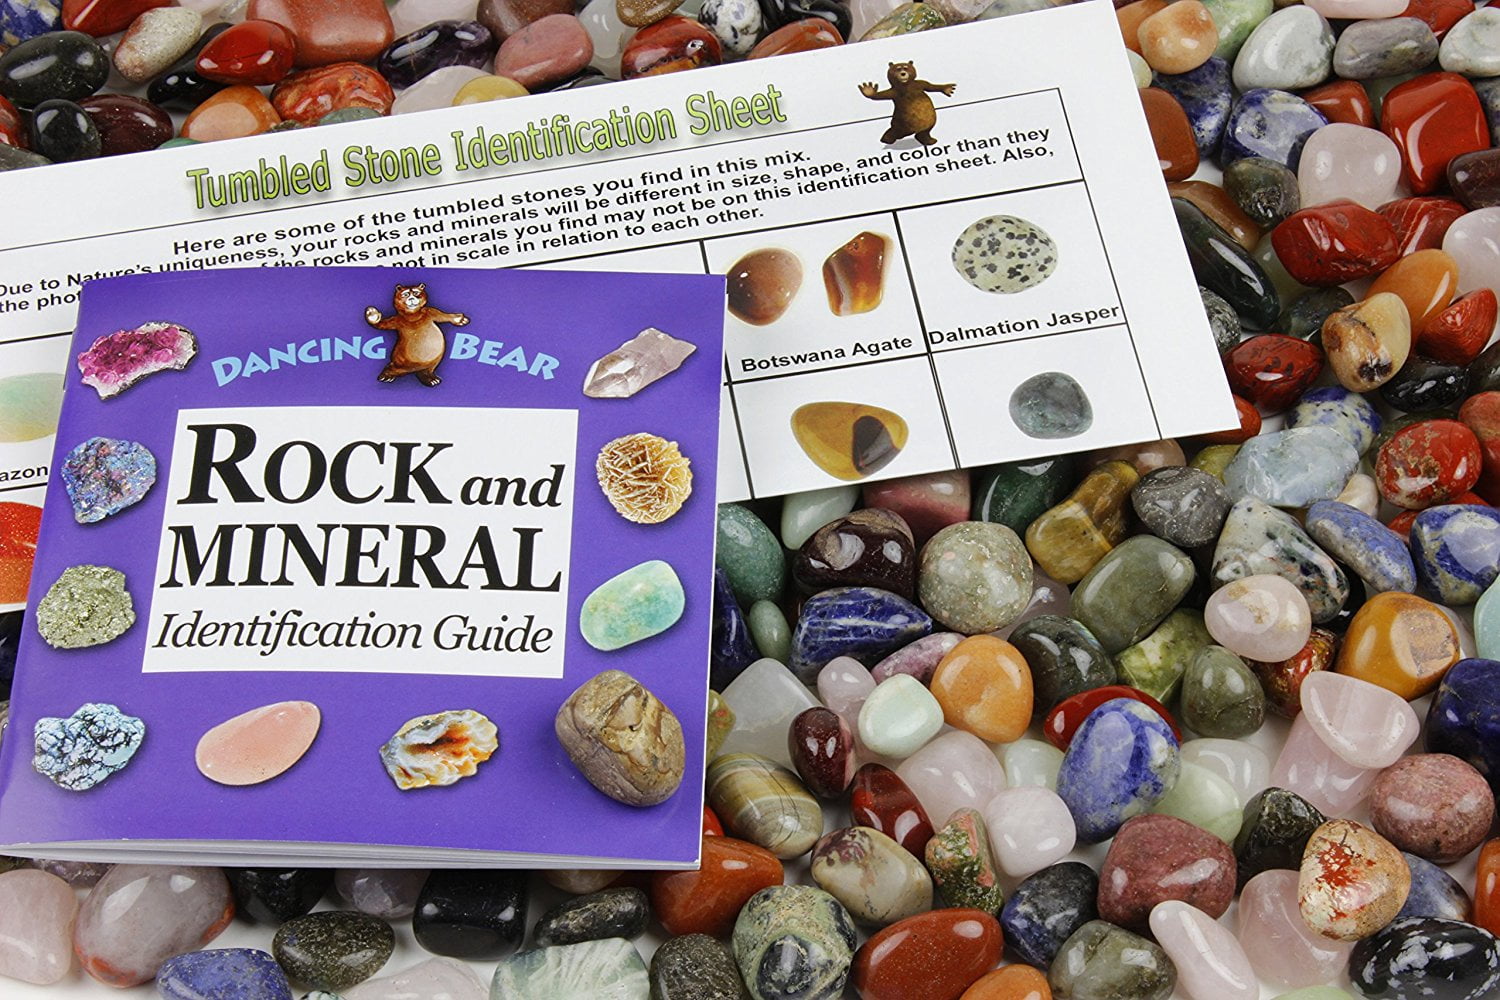 Box and 2 Velvet Pouches Included Geology Gem Kit for Kids Brand Dancing Bear Rock and Mineral Geology Education Collection 18 Pcs of Gem Stones w Identification Book 